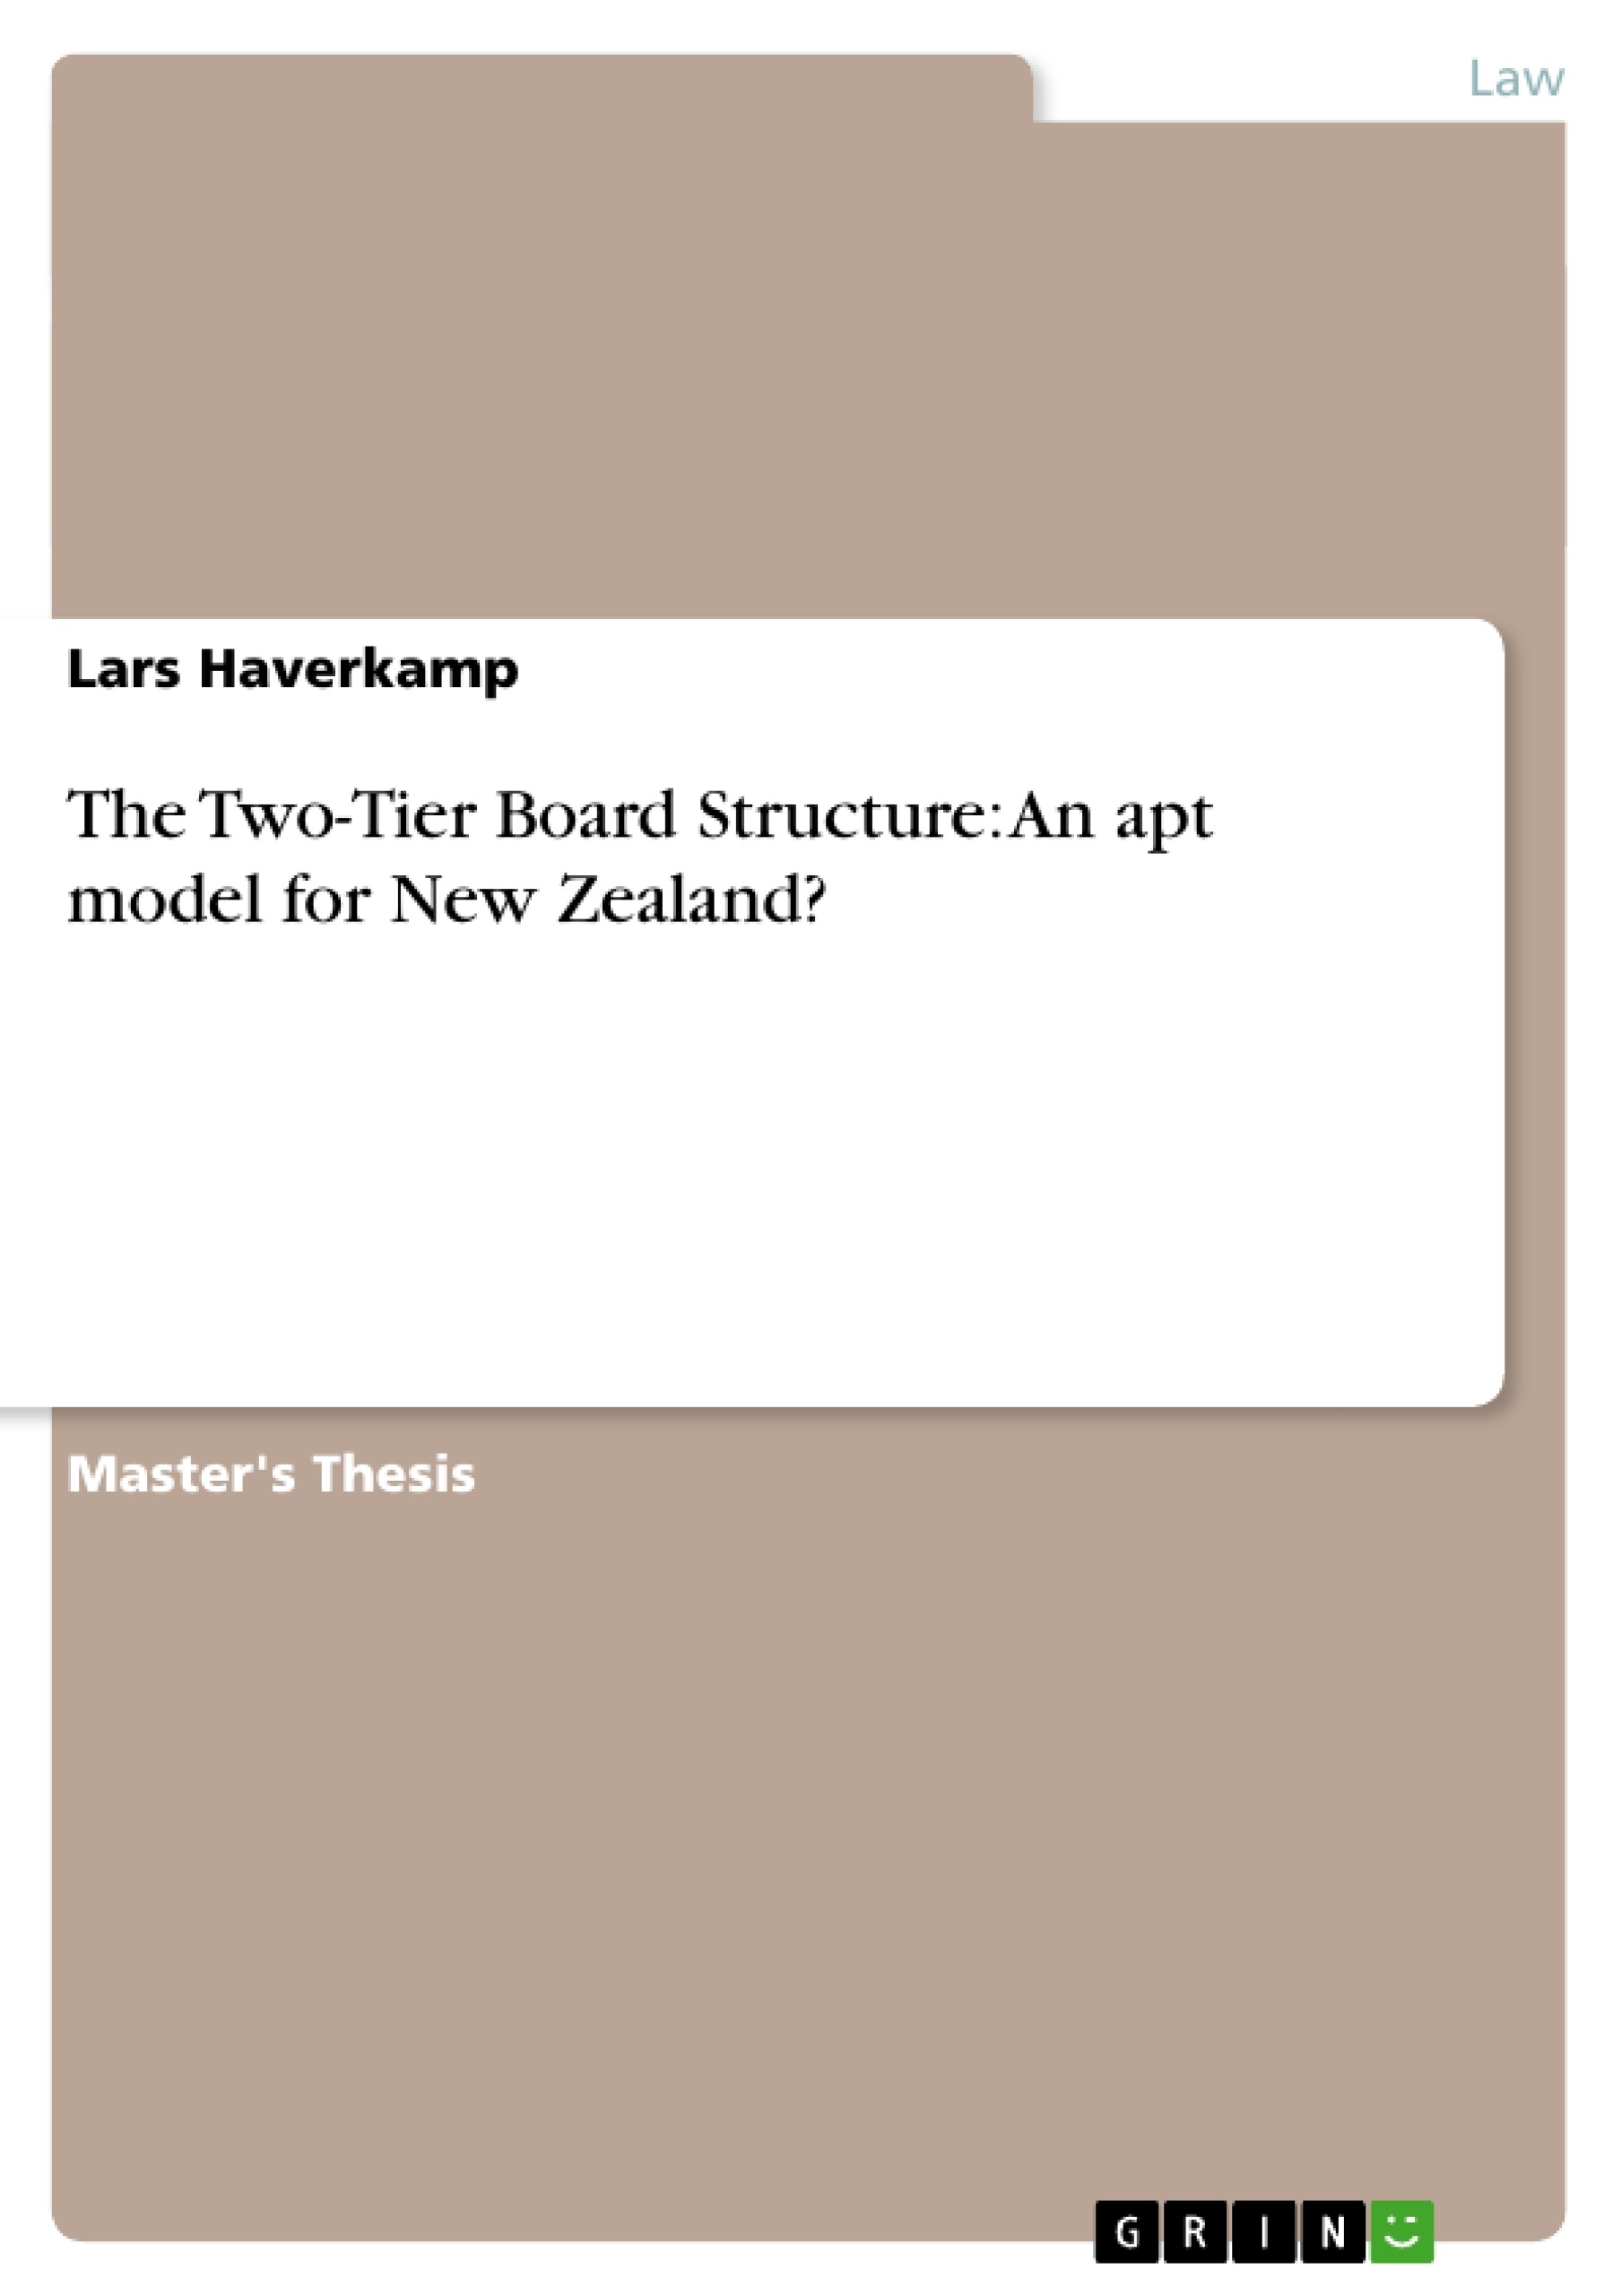 Title: The Two-Tier Board Structure: An apt model for New Zealand?